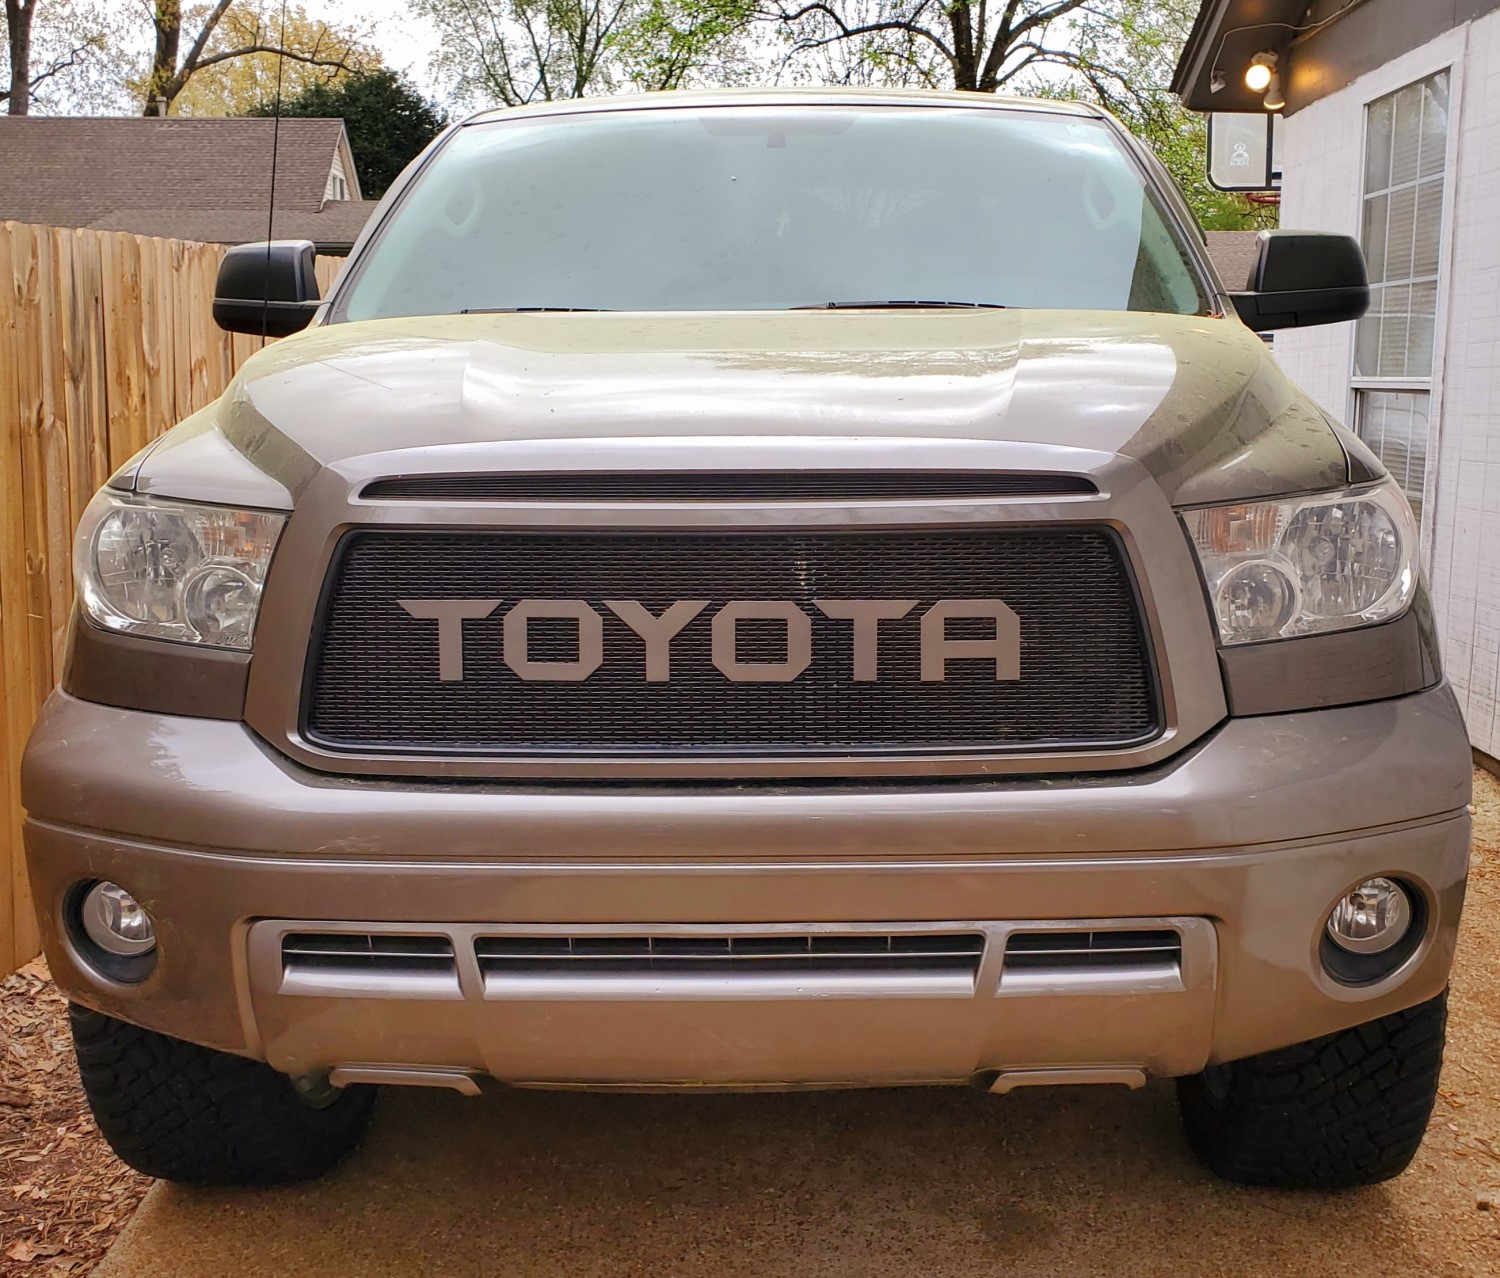 2010 - 2013 Toyota Tundra Grill Mesh with Big Letters #4